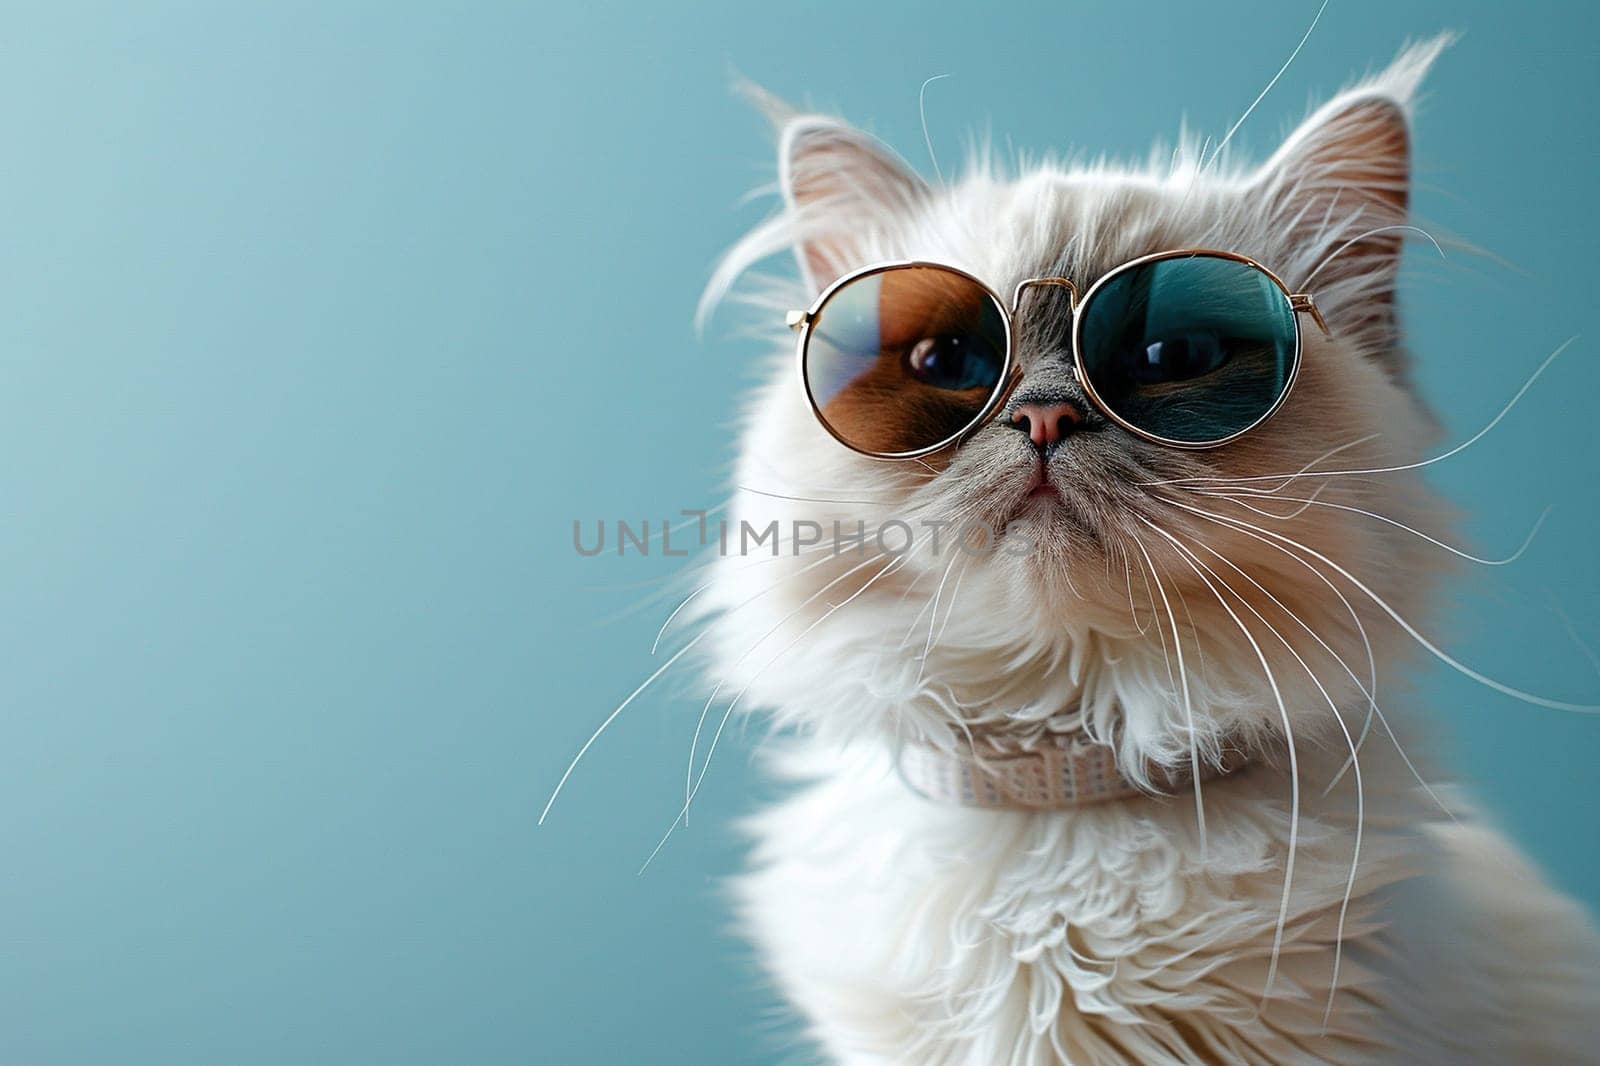 Portrait of a fluffy white cat in sunglasses on a blue background with space for text.